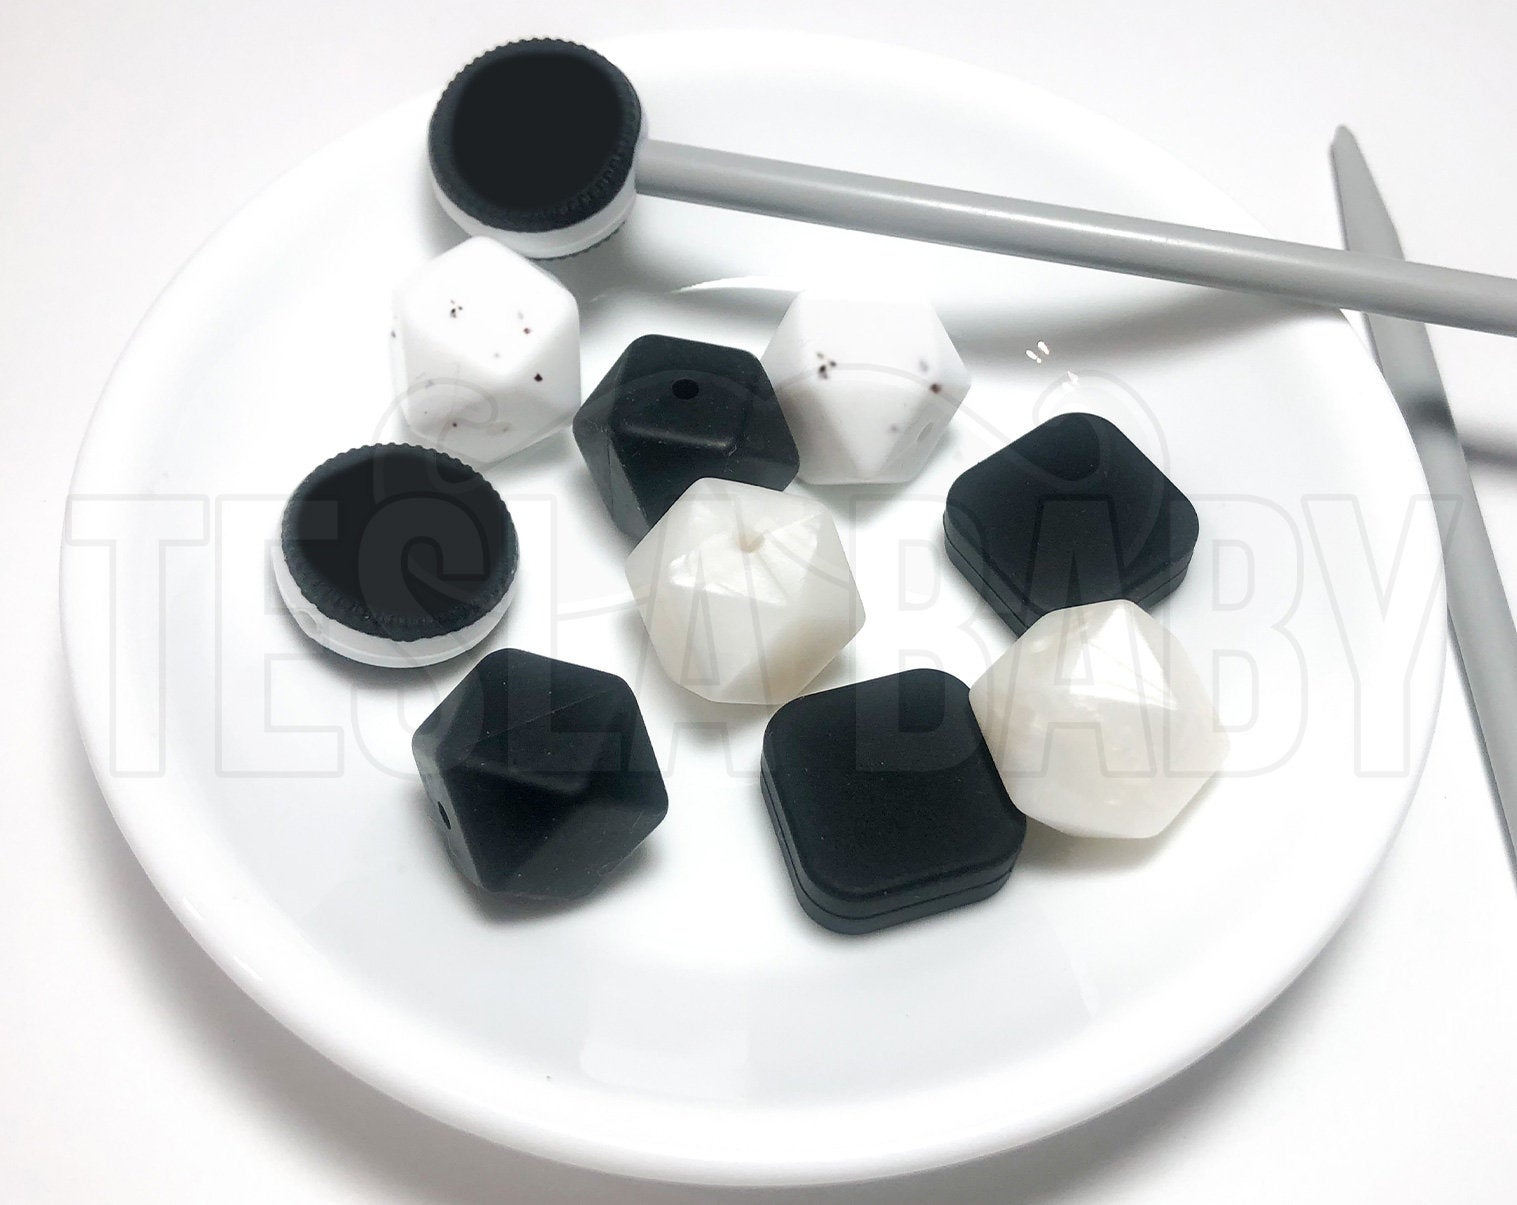 Knitting Needle Stoppers - Cookies and Cream - Beader Caps - Beader Tips - Back Stoppers - Point Protectors - End Stoppers - Stitch Holder